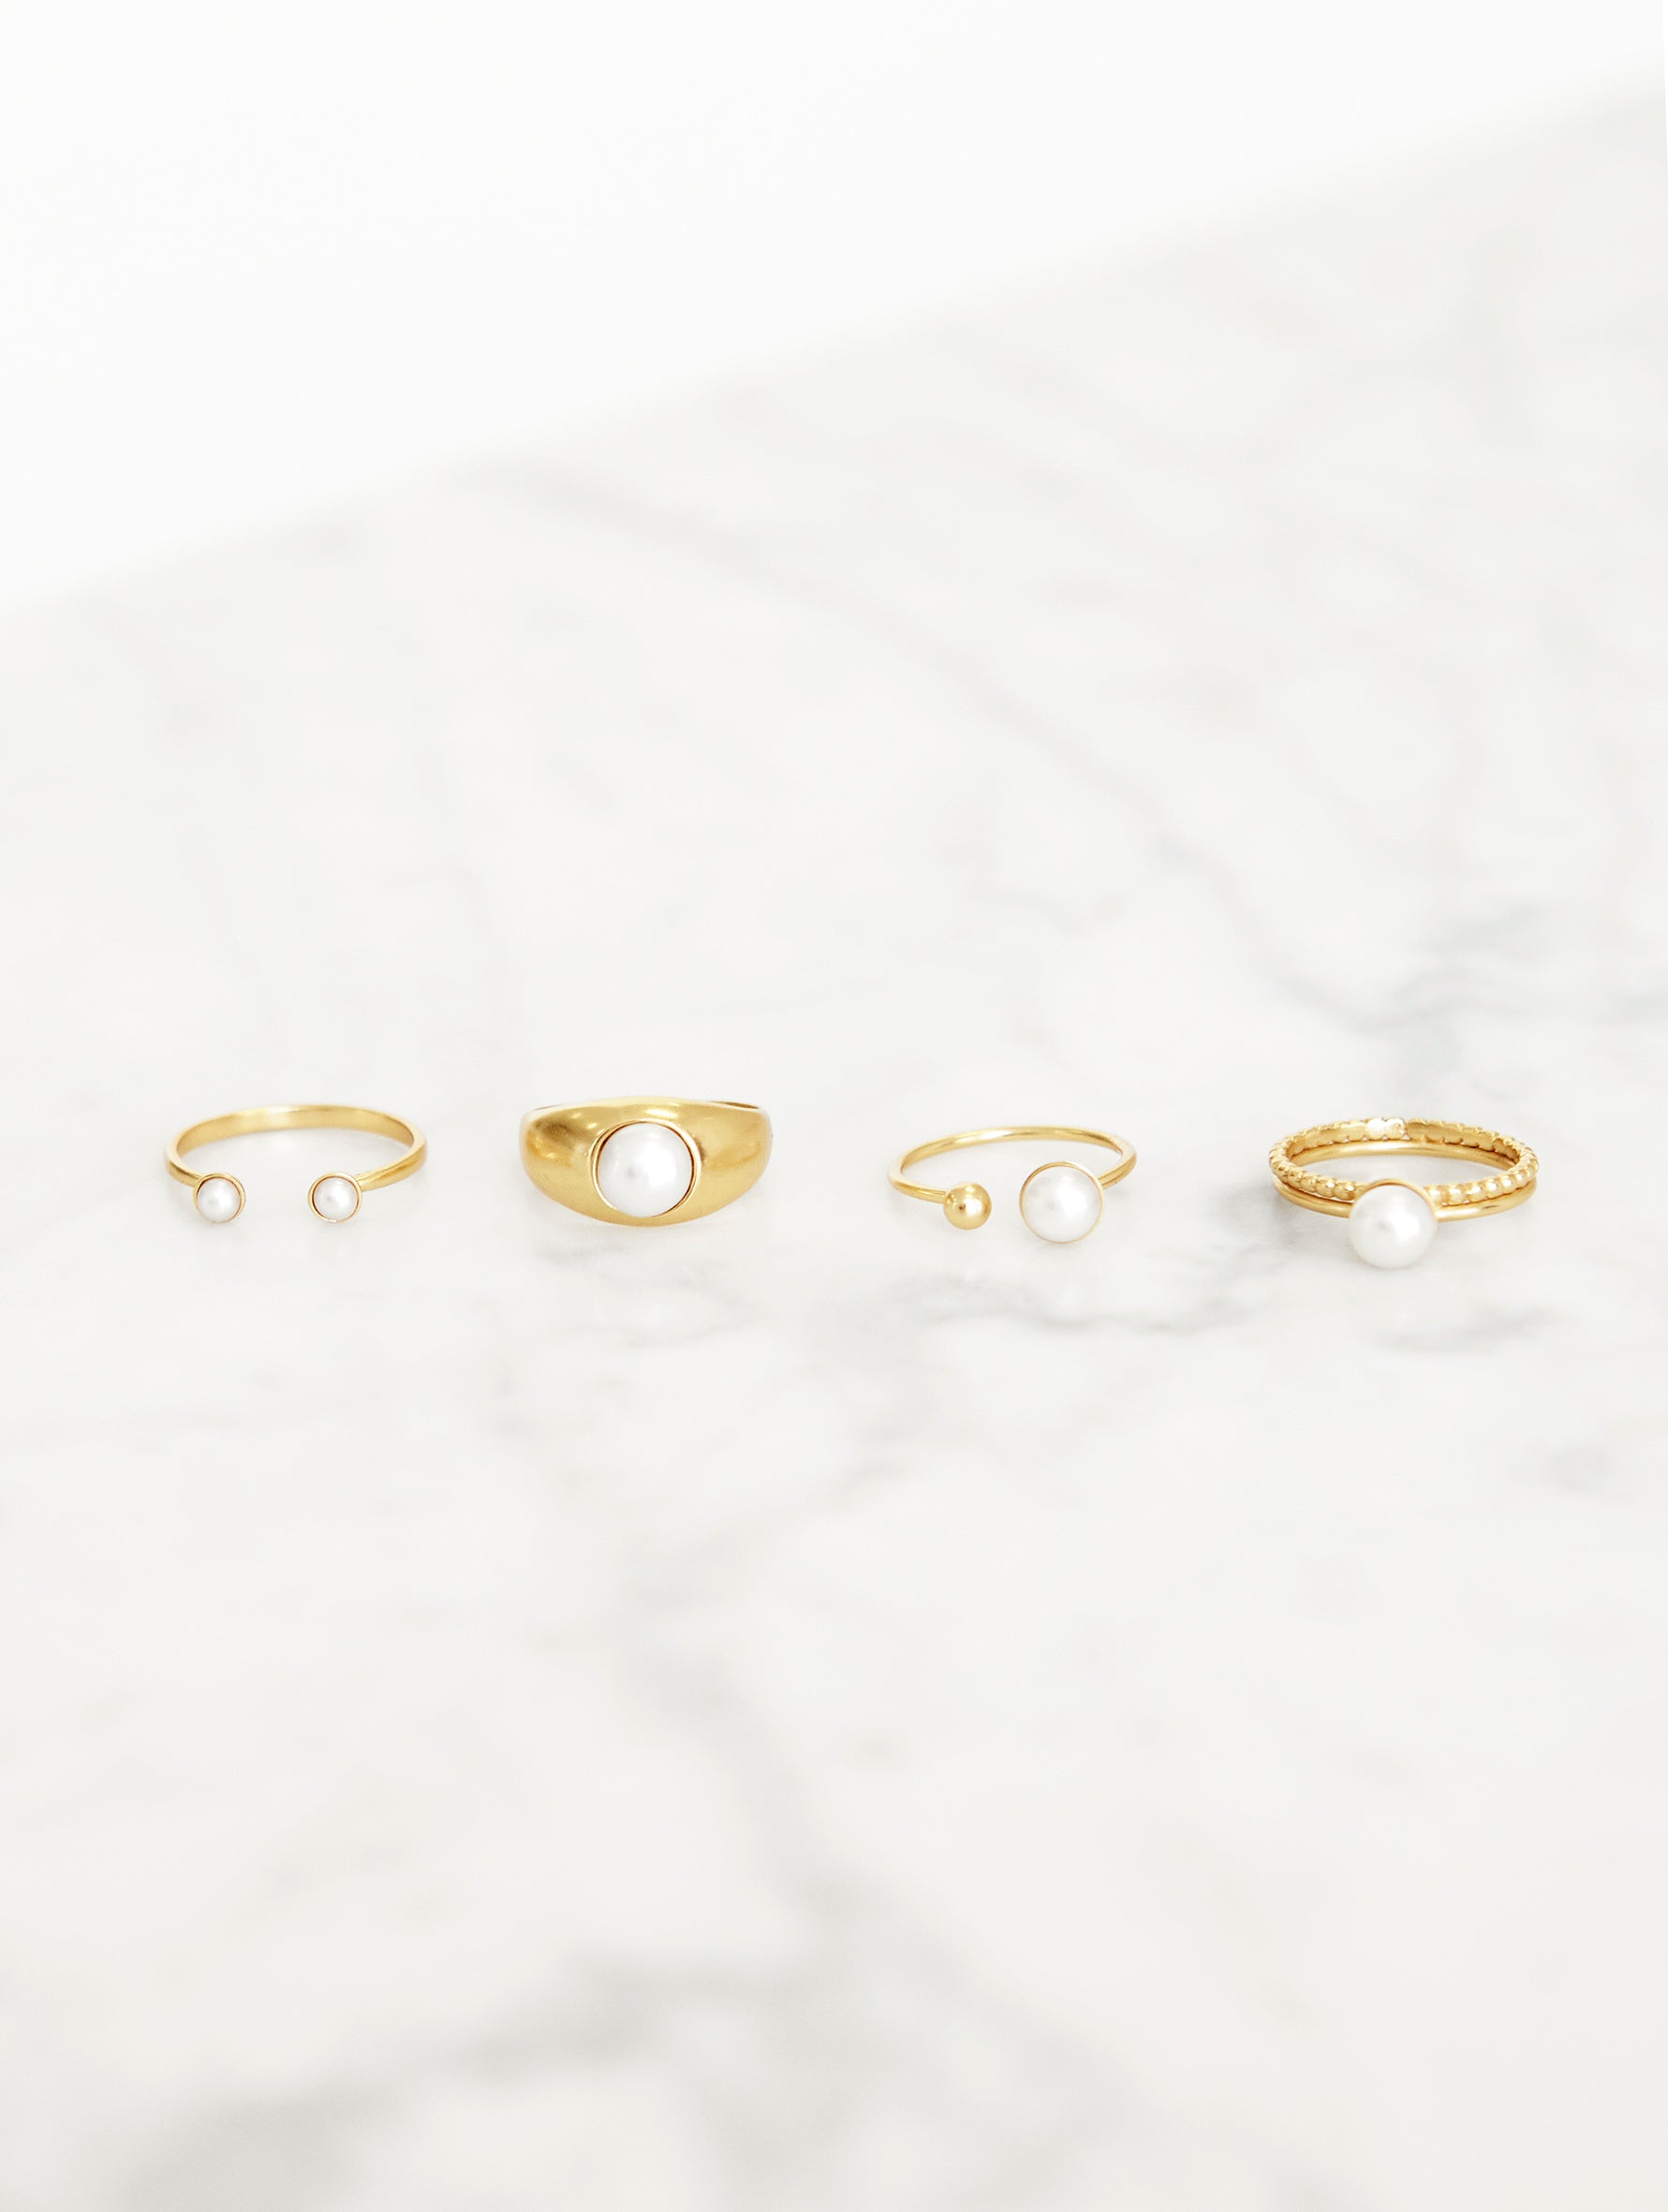 Signet Pearle Ring Gold